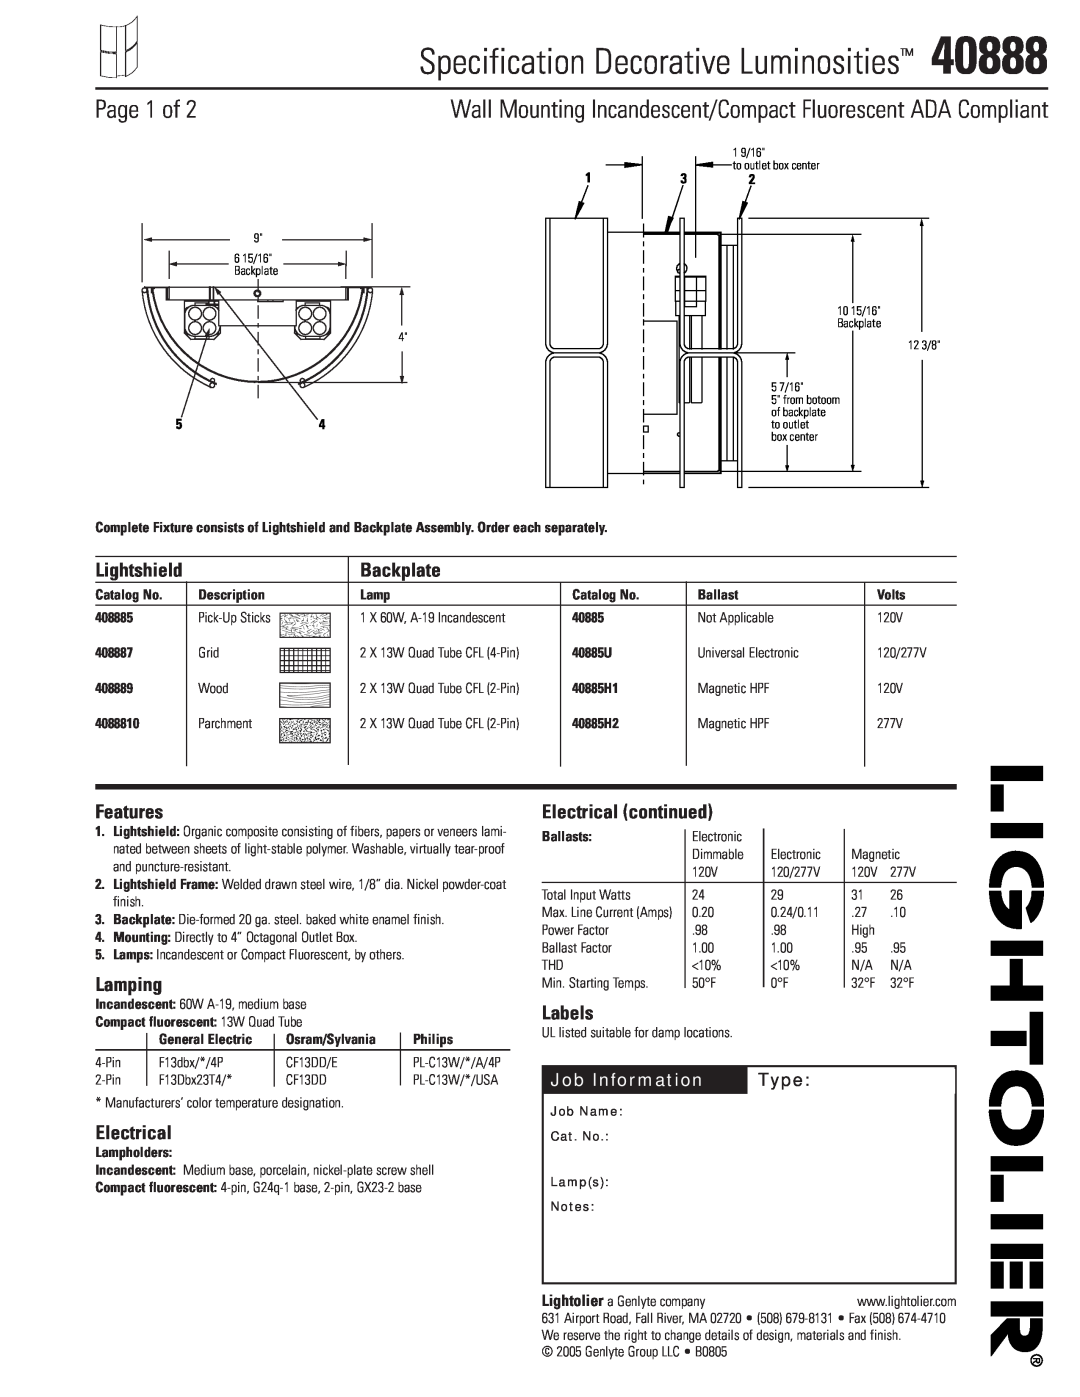 Lightolier 40888 manual Specification Decorative Luminosities, Page 1 of, Backplate, Features, Lamping, Electrical, Labels 